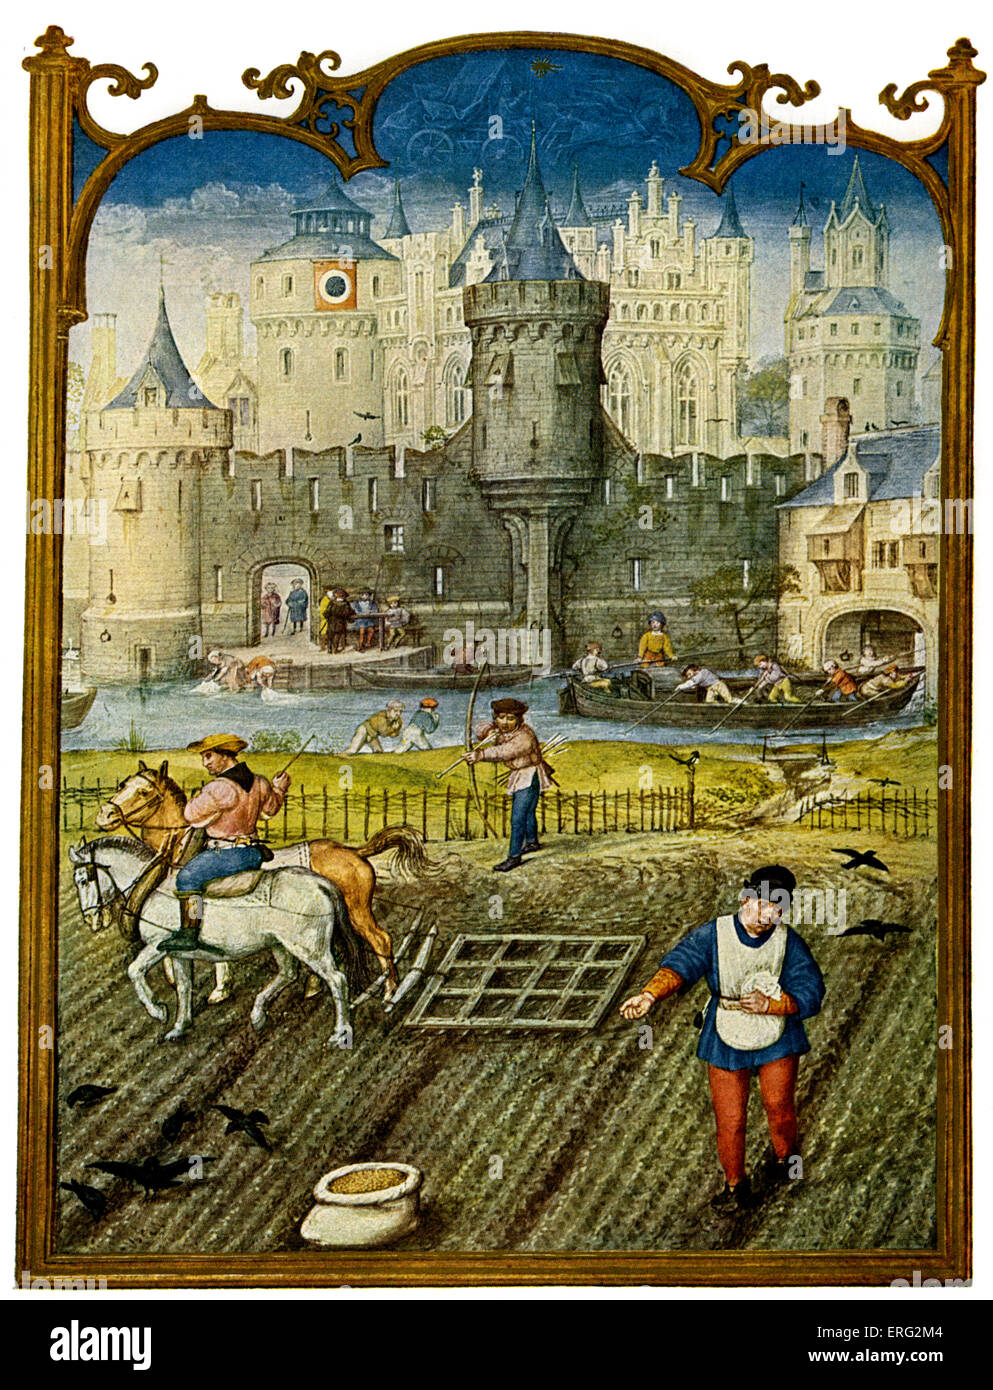 Country life a scene showing a field  being ploughed against the backdrop of a fortified town in the late Middle Ages.  A Stock Photo